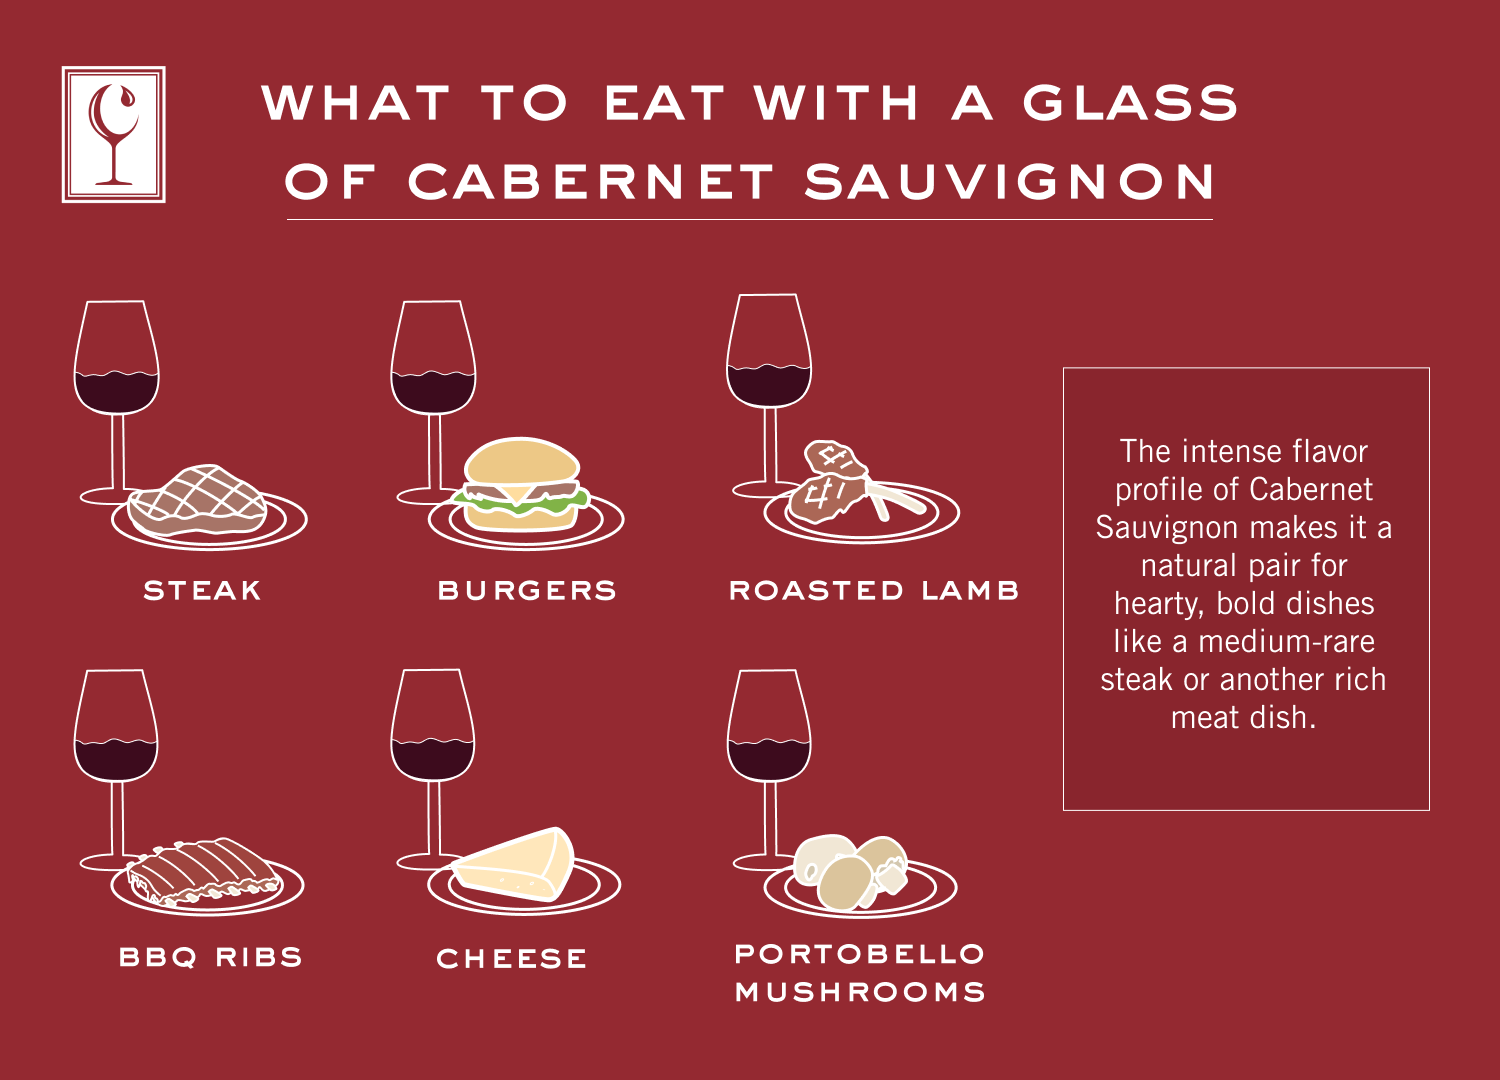 What to eat with a glass of Cabernet Sauvignon